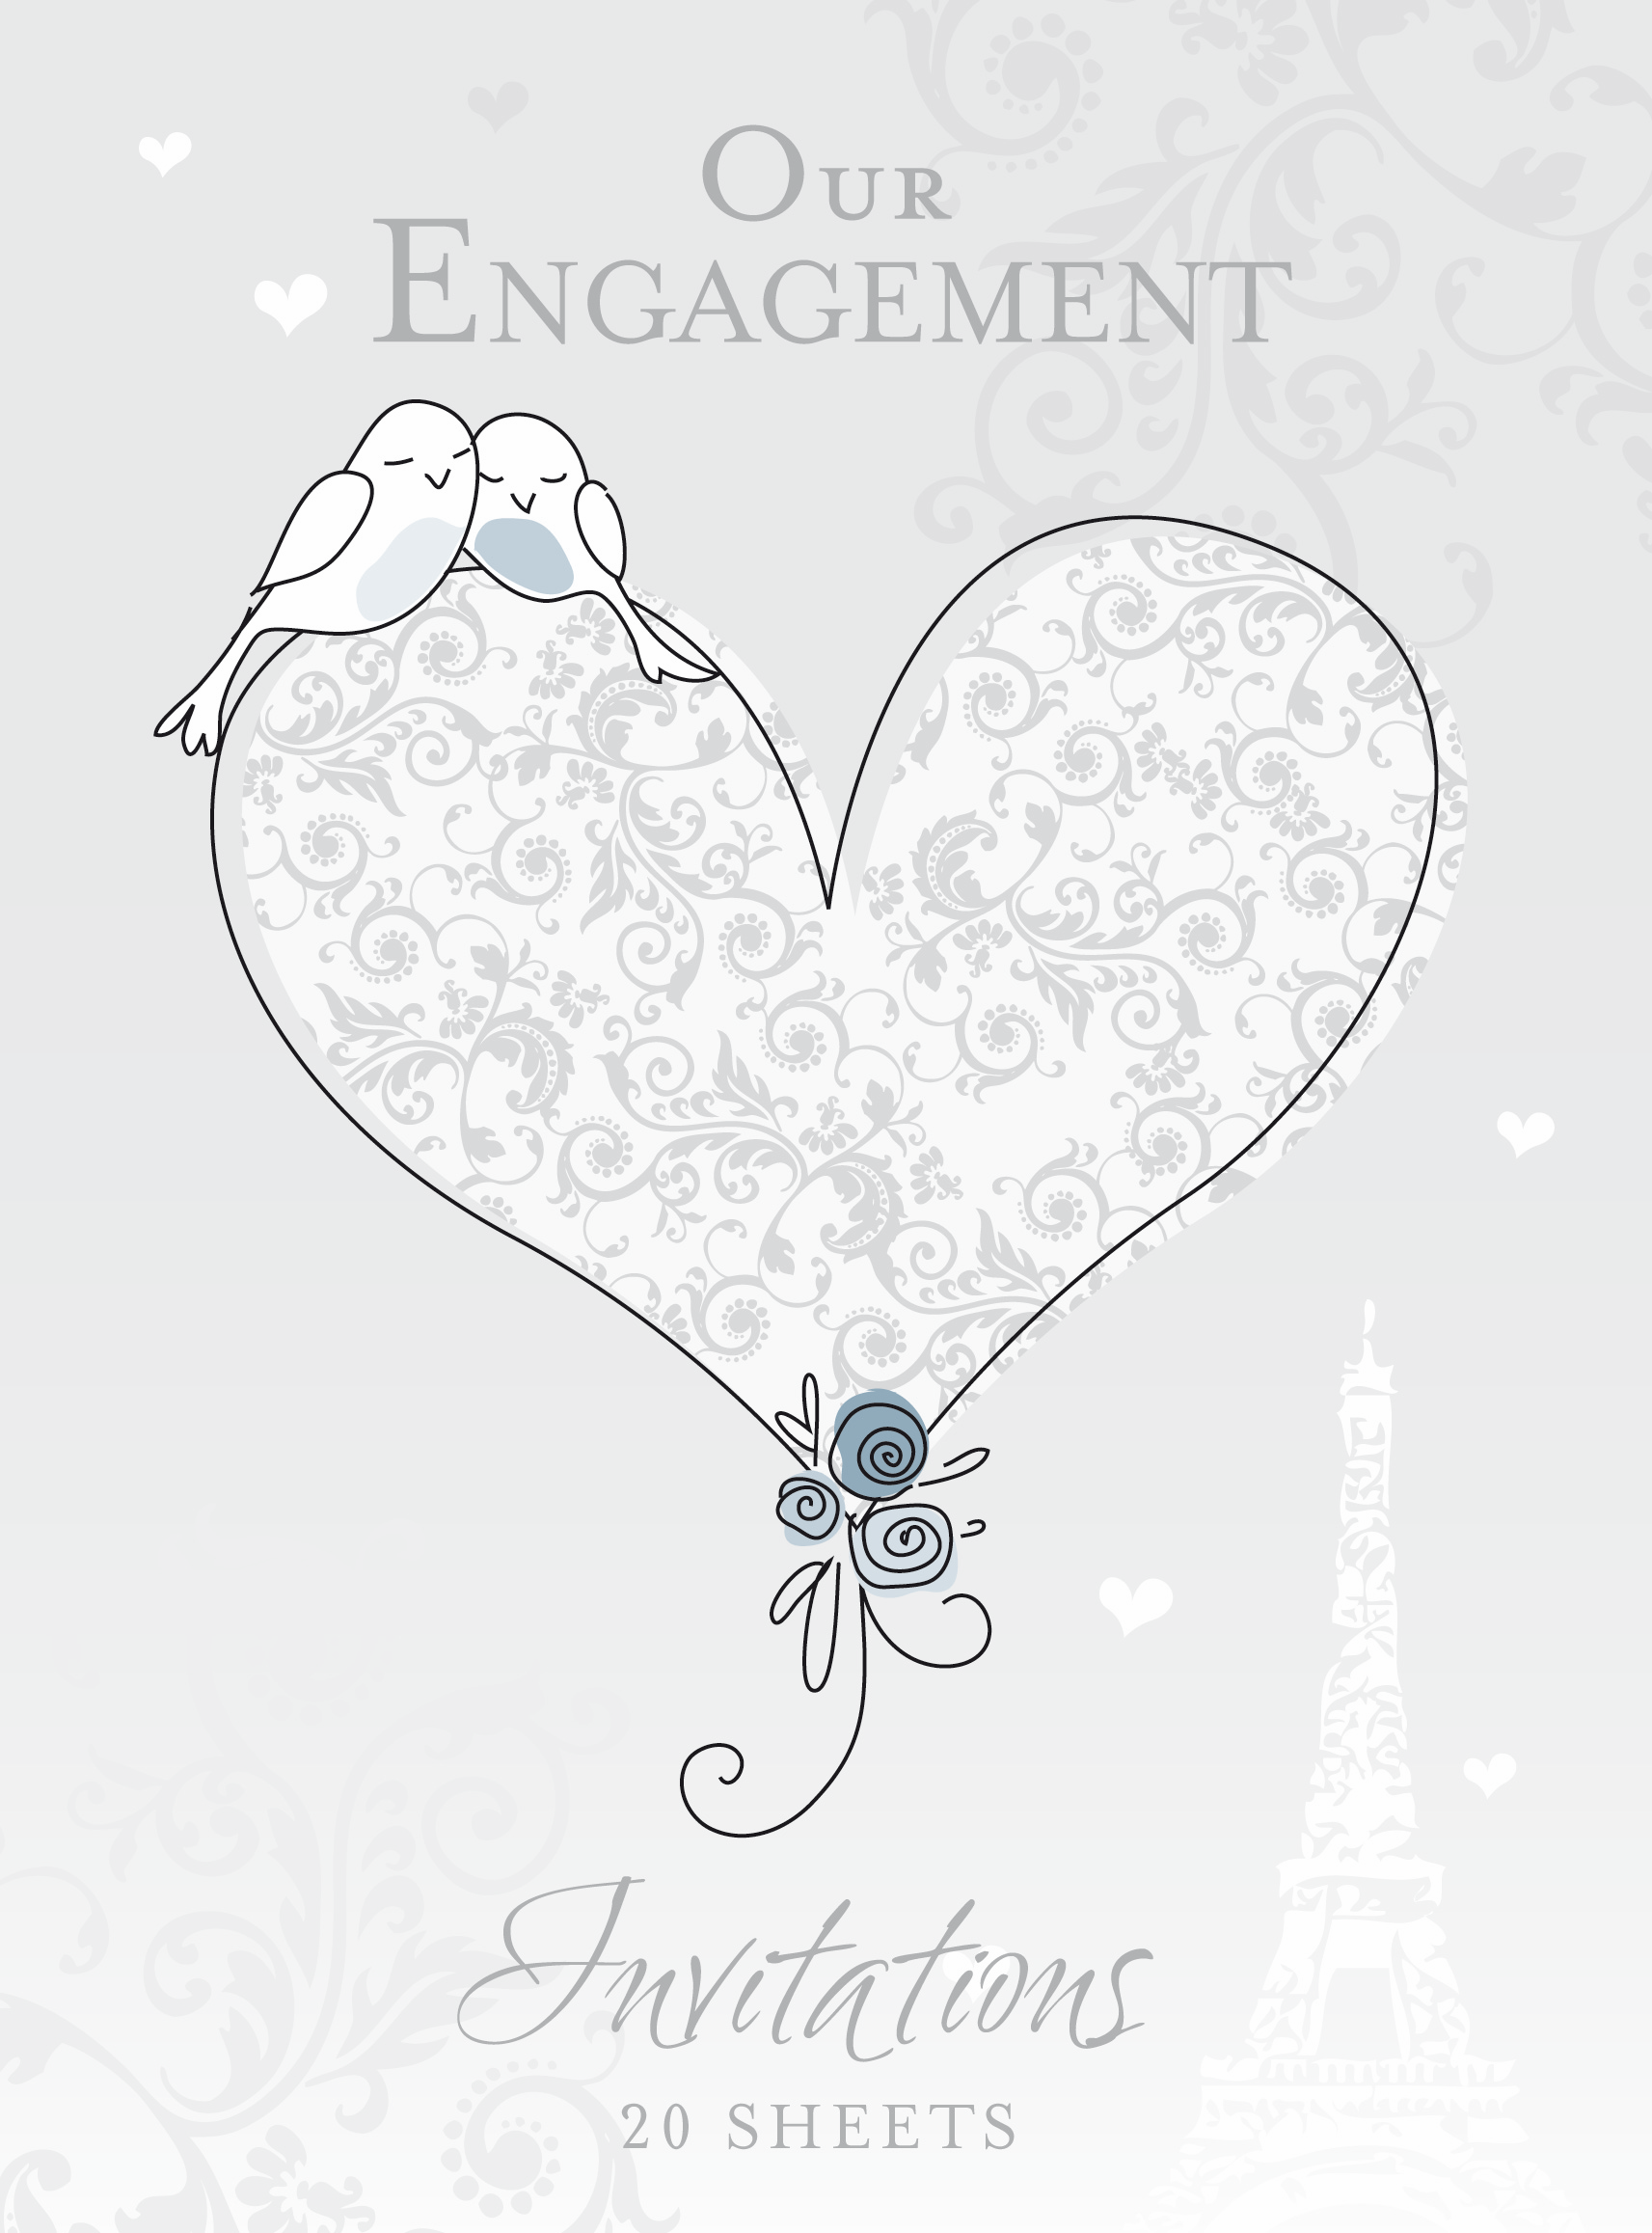 Our Engagement- Invitation Pad - 20 Sheets